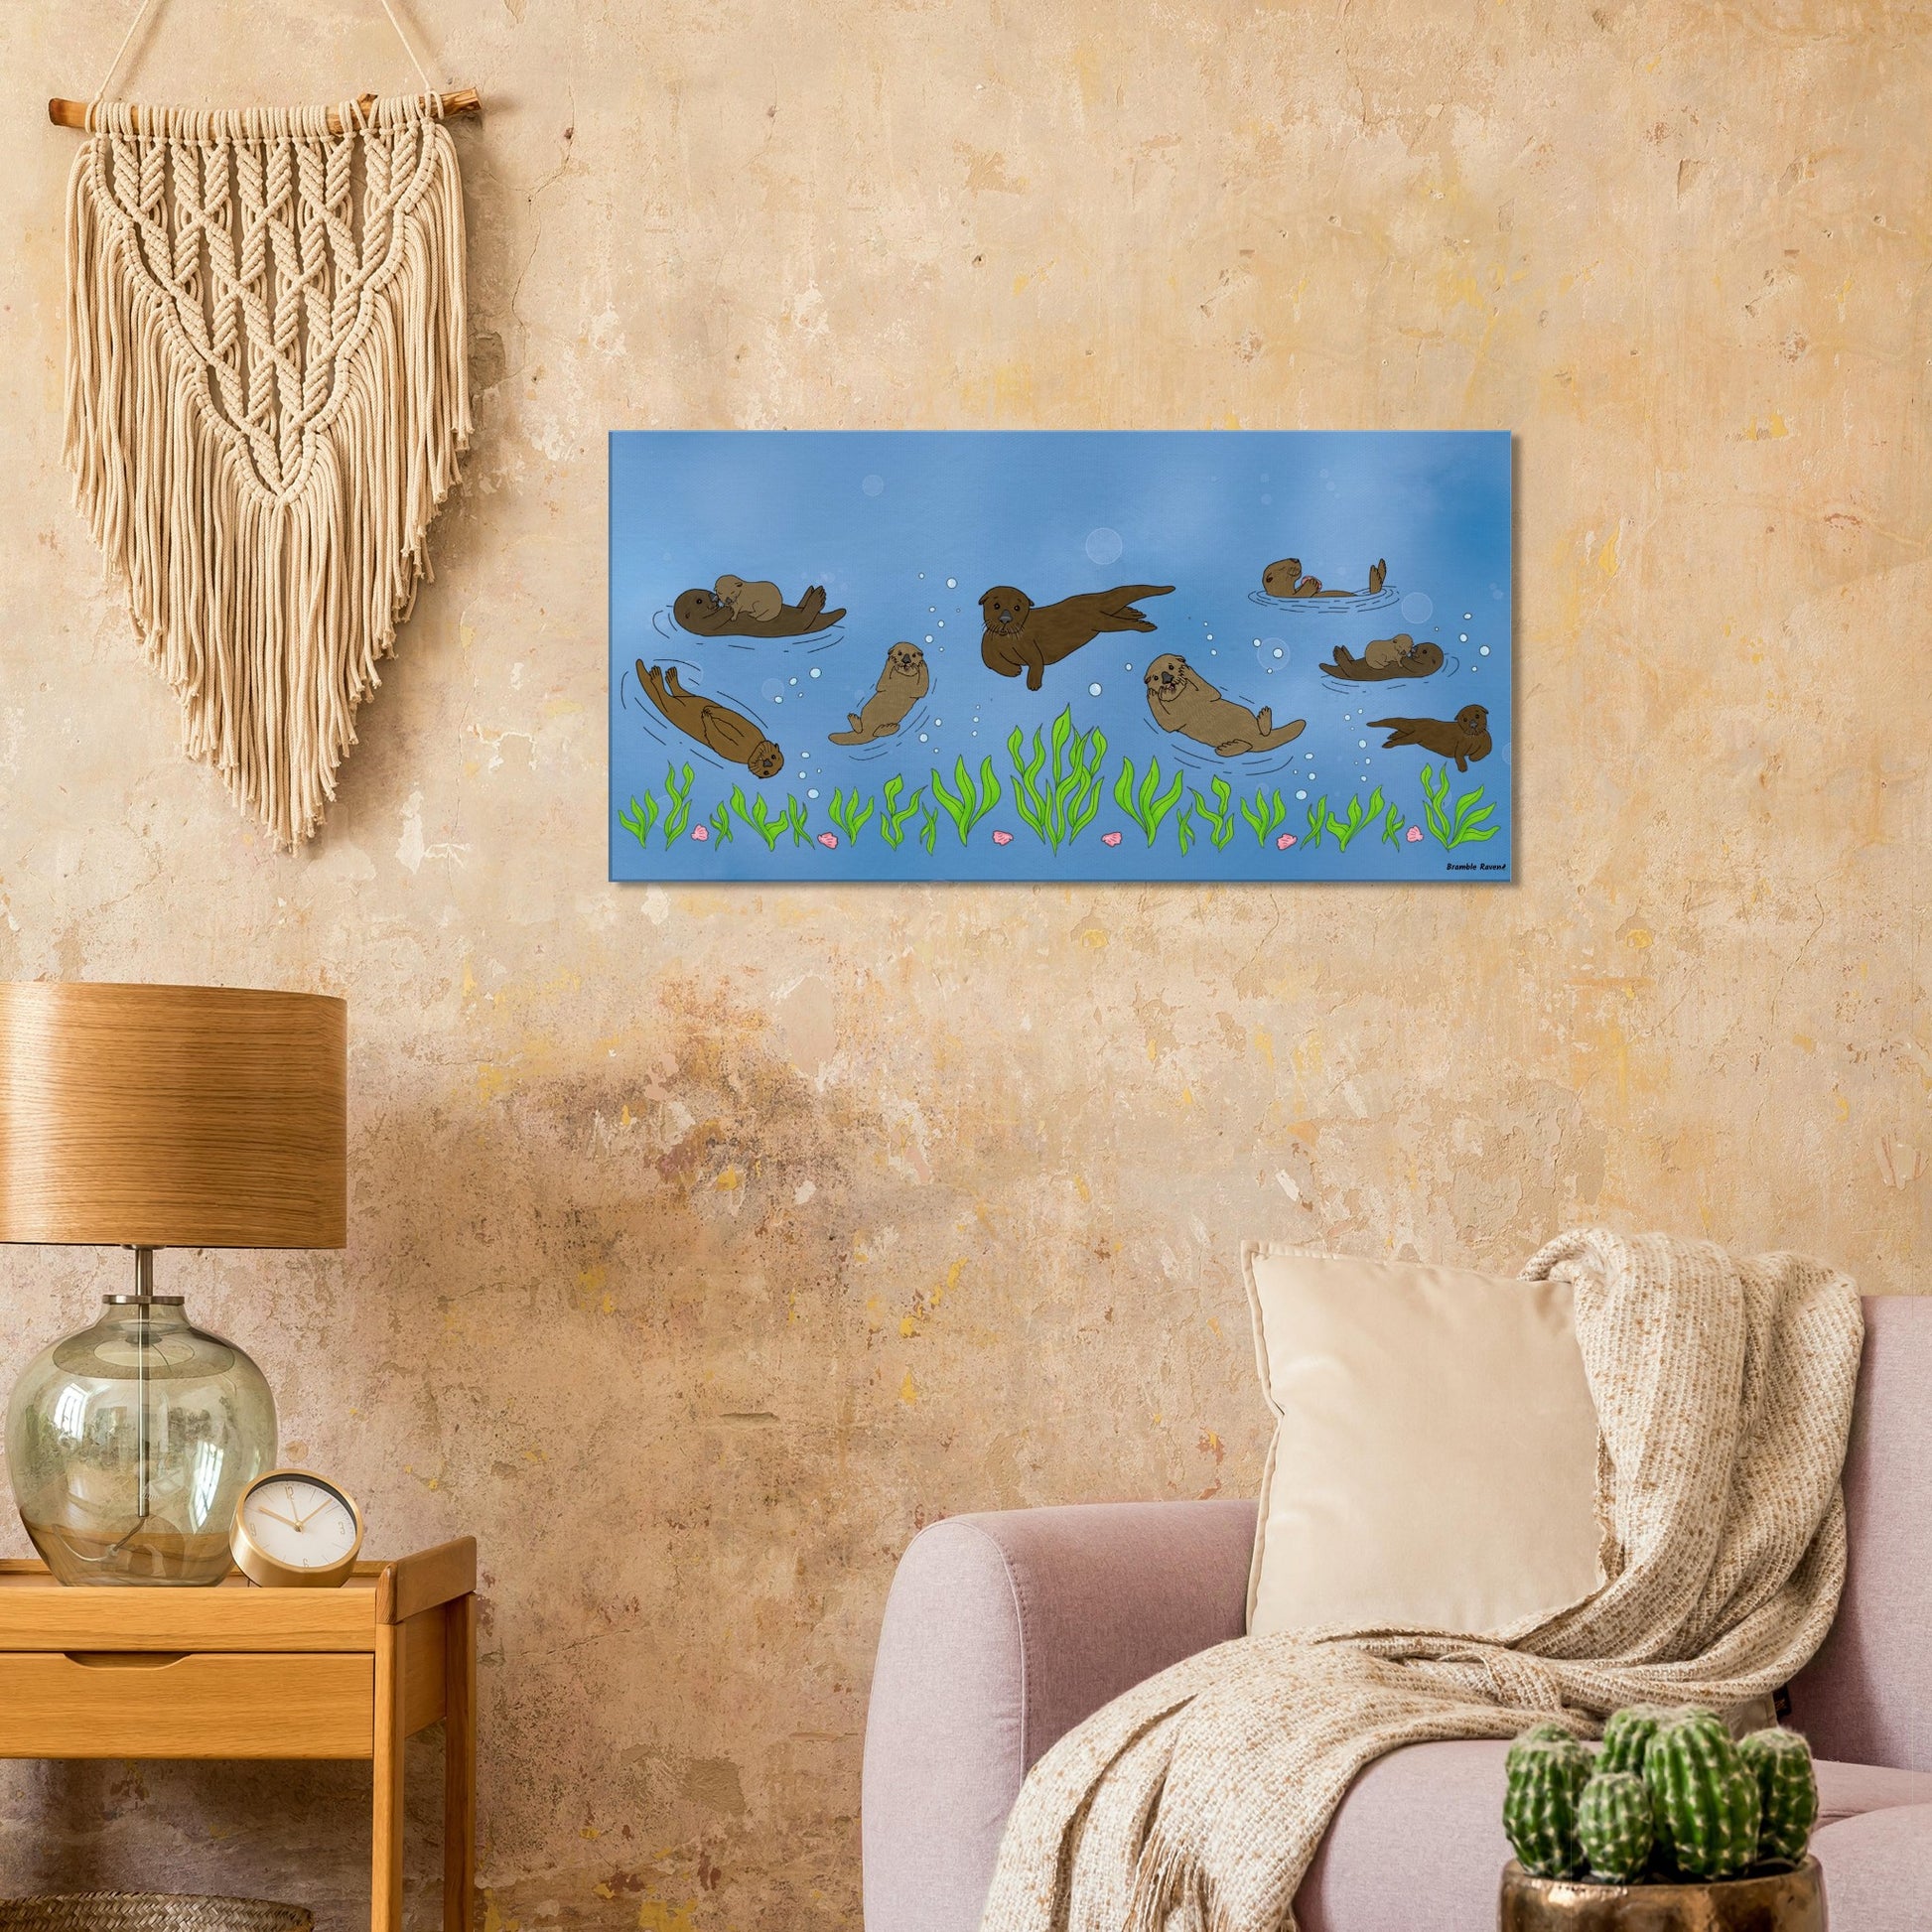 20 by 40 inch slim canvas wall art print of sea otters swimming along the seabed. Shown on beige wall by macramé, next to a wooden end table and lamp, and above a pink sofa.